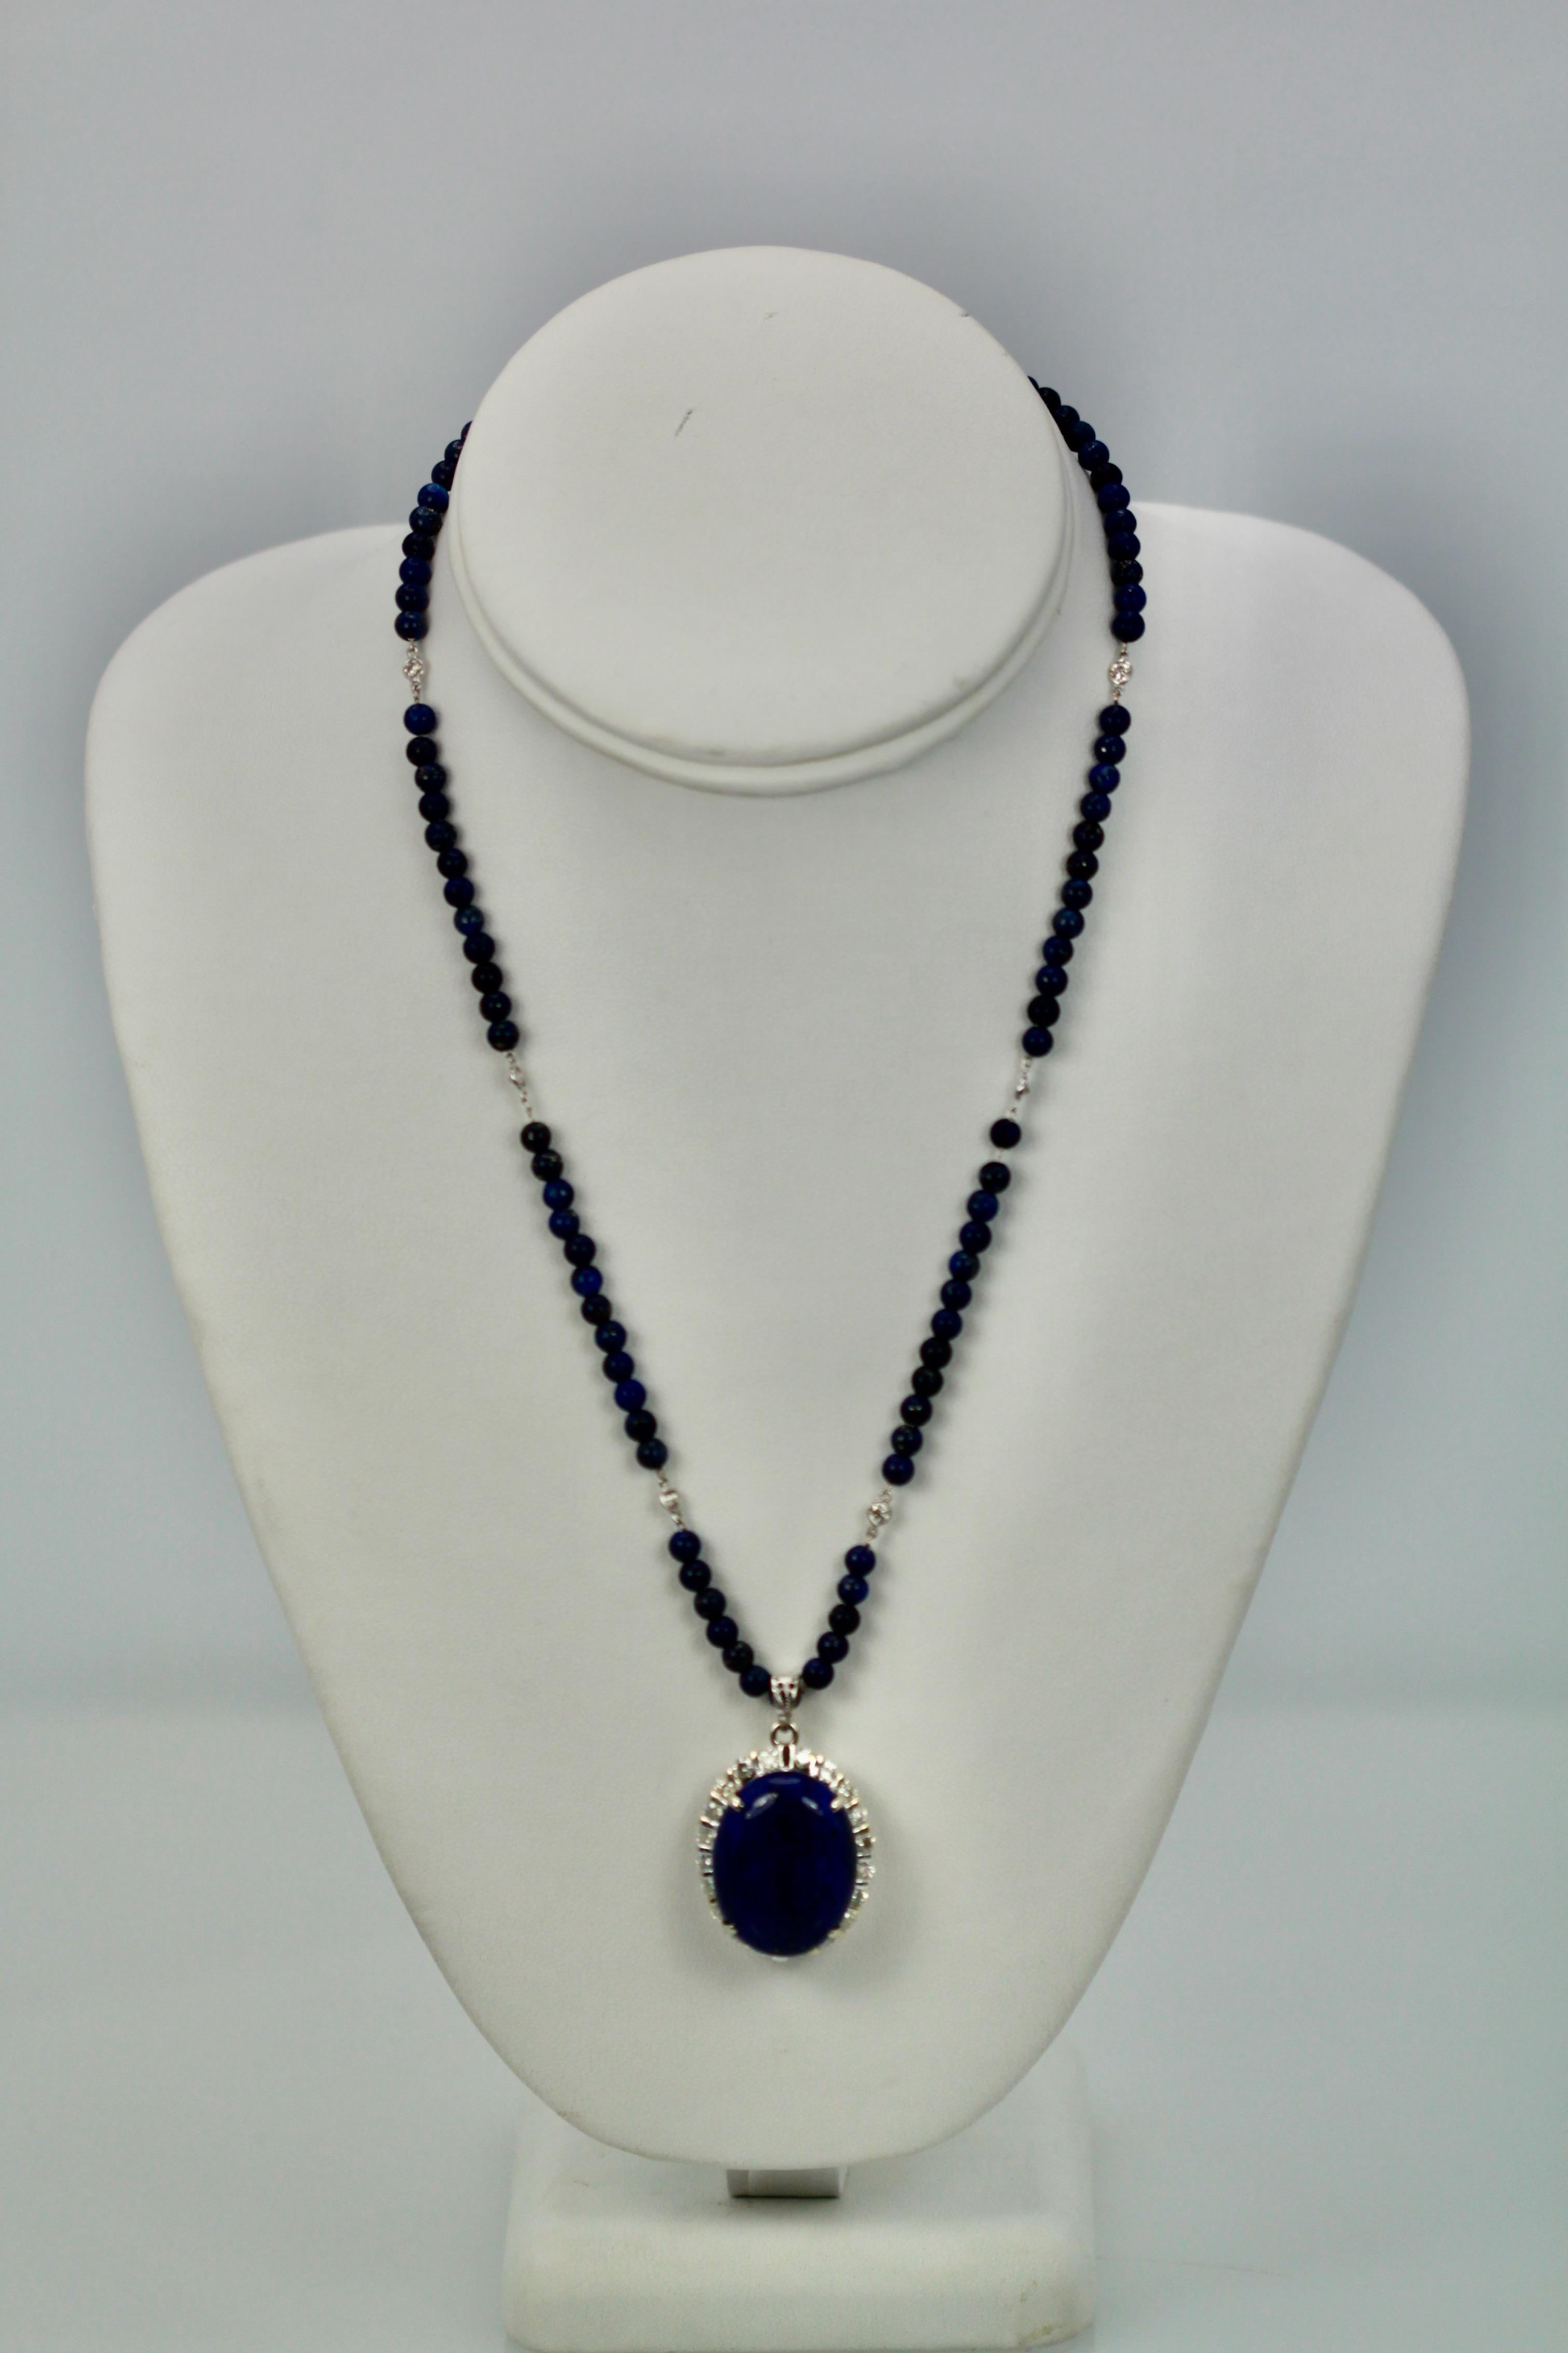 Extra Fine Lapis Lazuli Pendant Diamond Surround 18 Karat Diamond Studded Chain In New Condition For Sale In North Hollywood, CA